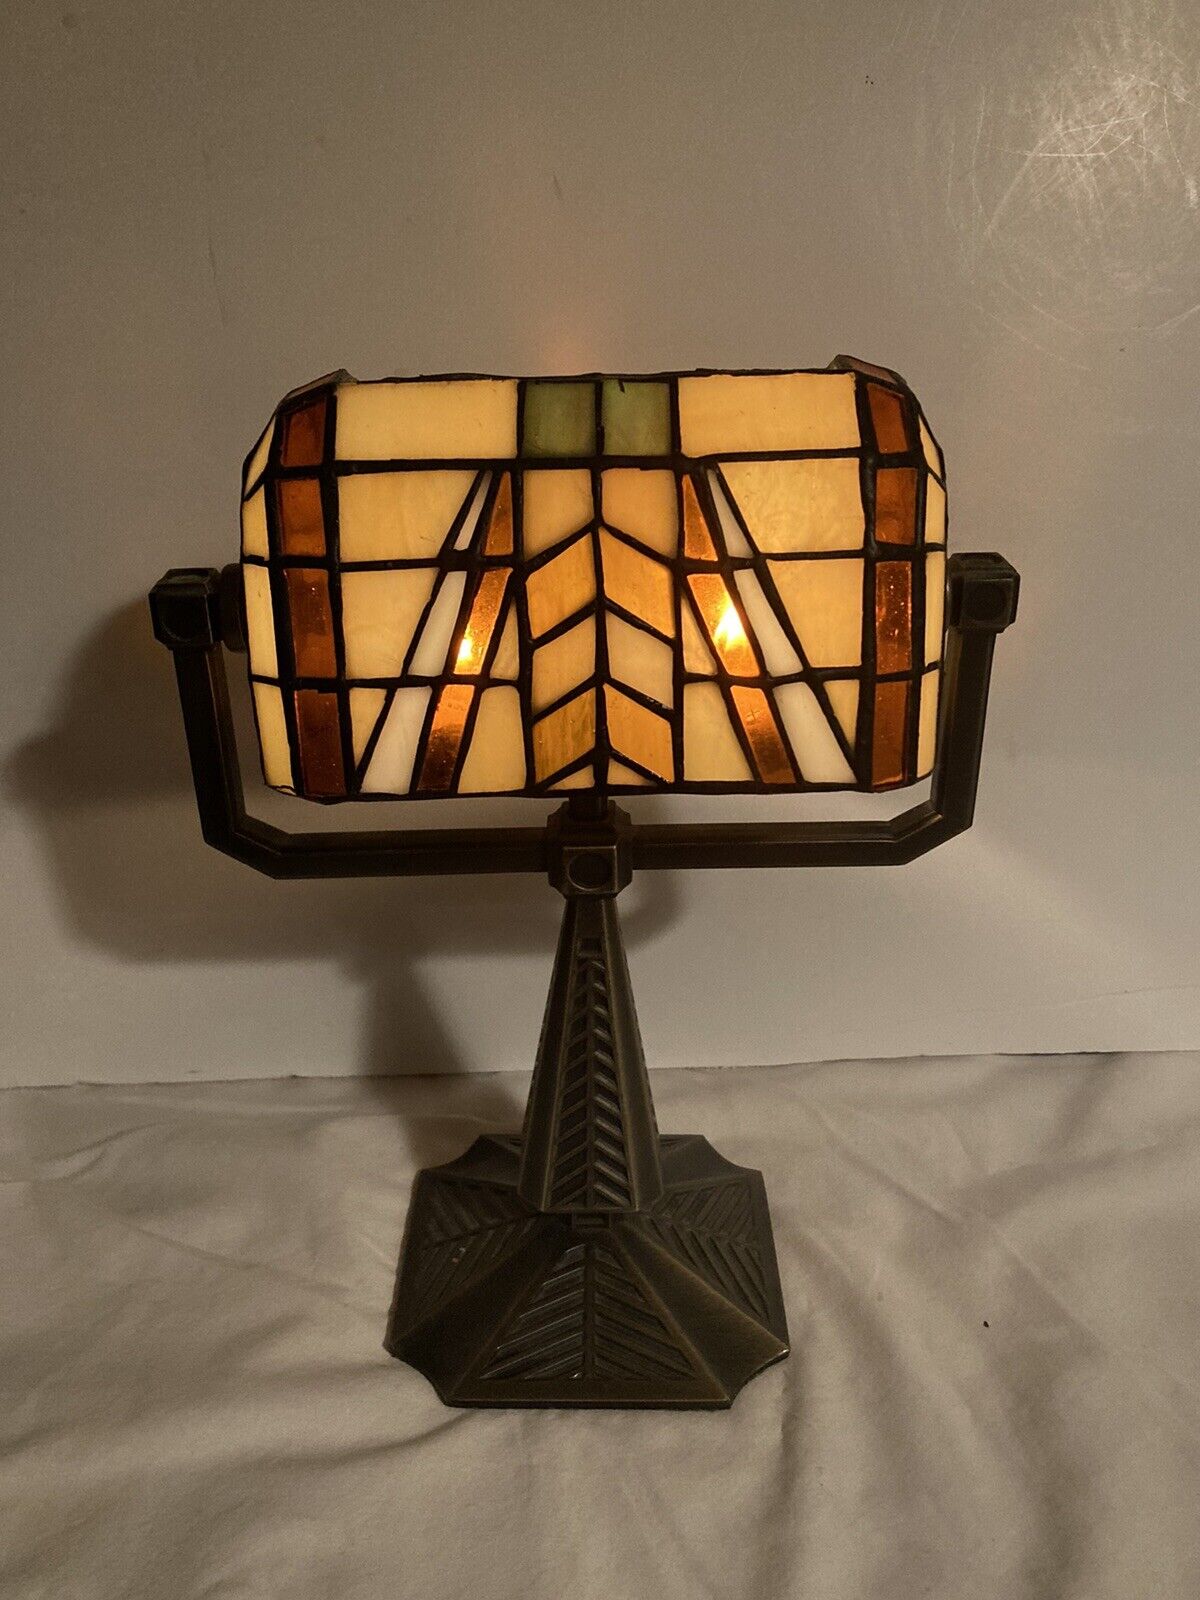 PartyLite Deco Stained Glass Tiffany Style Double Tealight Holder Lamp